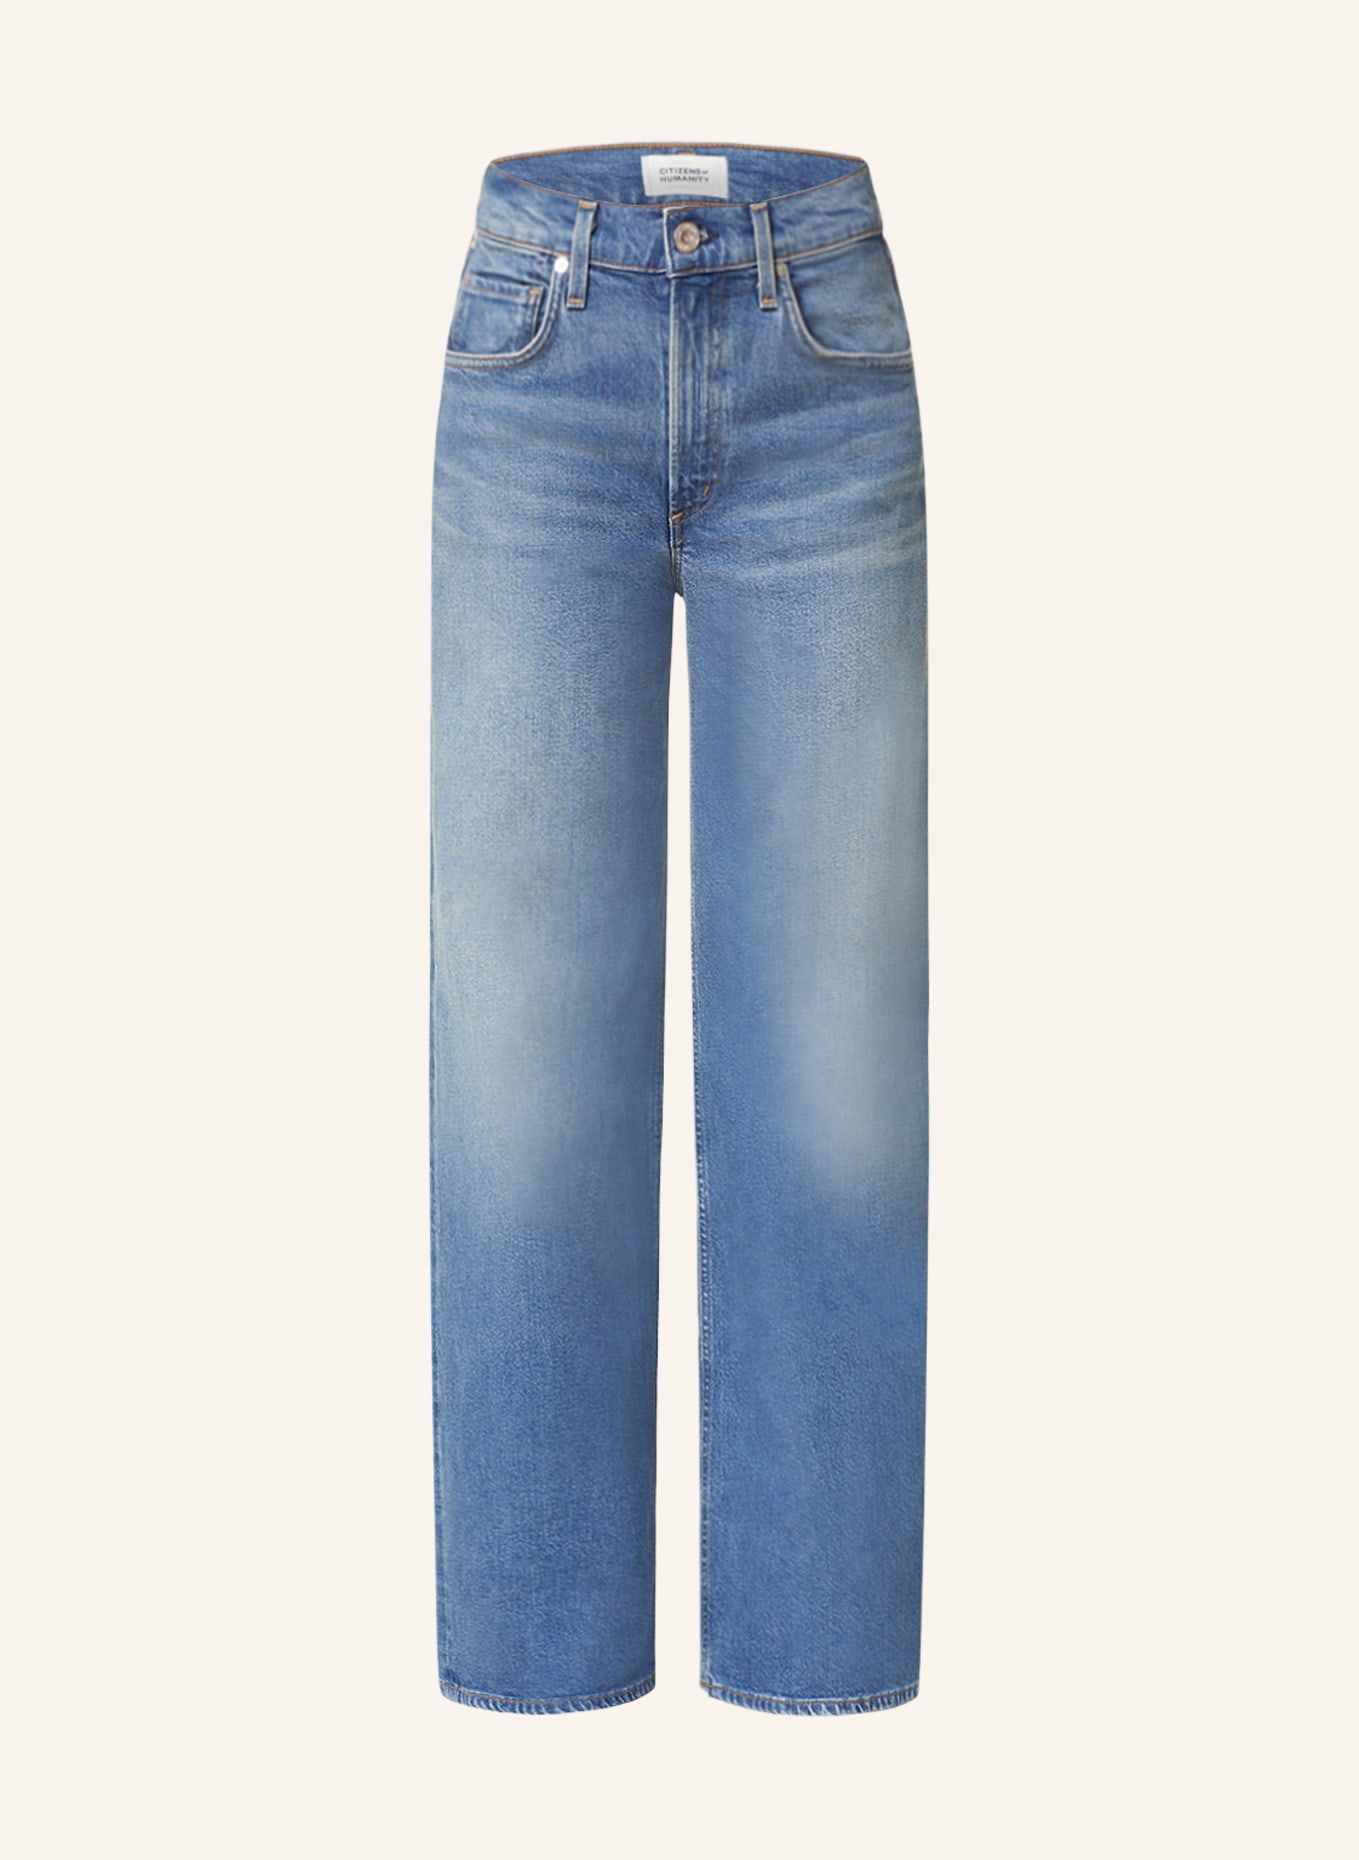 CITIZENS of HUMANITY Flared jeans LOLI, Color: Palazzo med ind (Image 1)